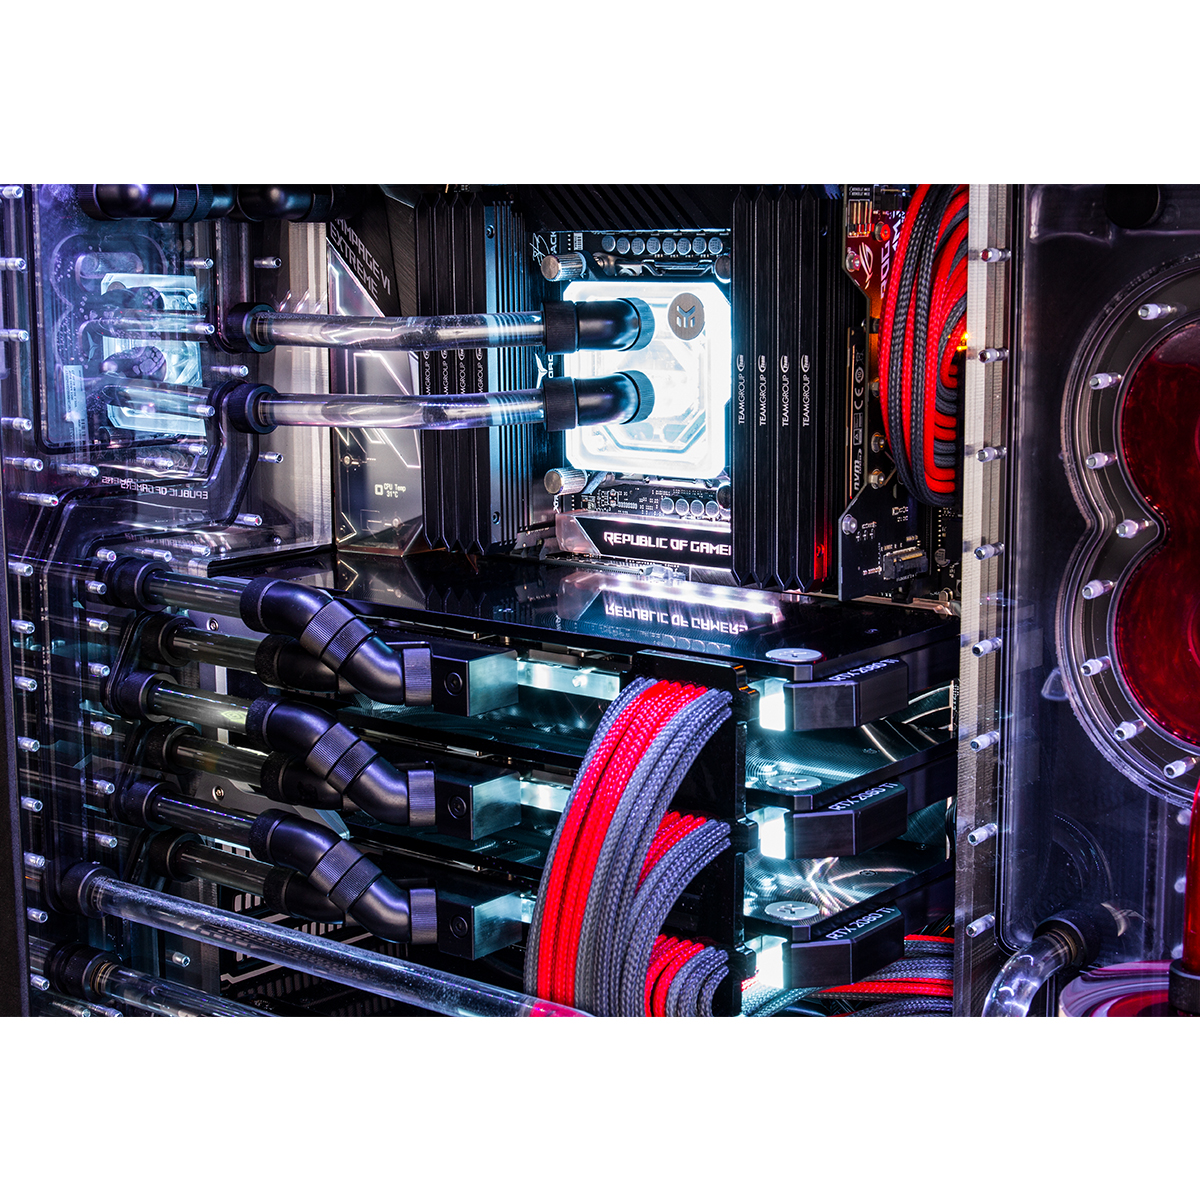 8Pack OrionX2 Dual System Extreme Overclocked PC - Intel Core i9 10980XE & Intel Core i7 10700K